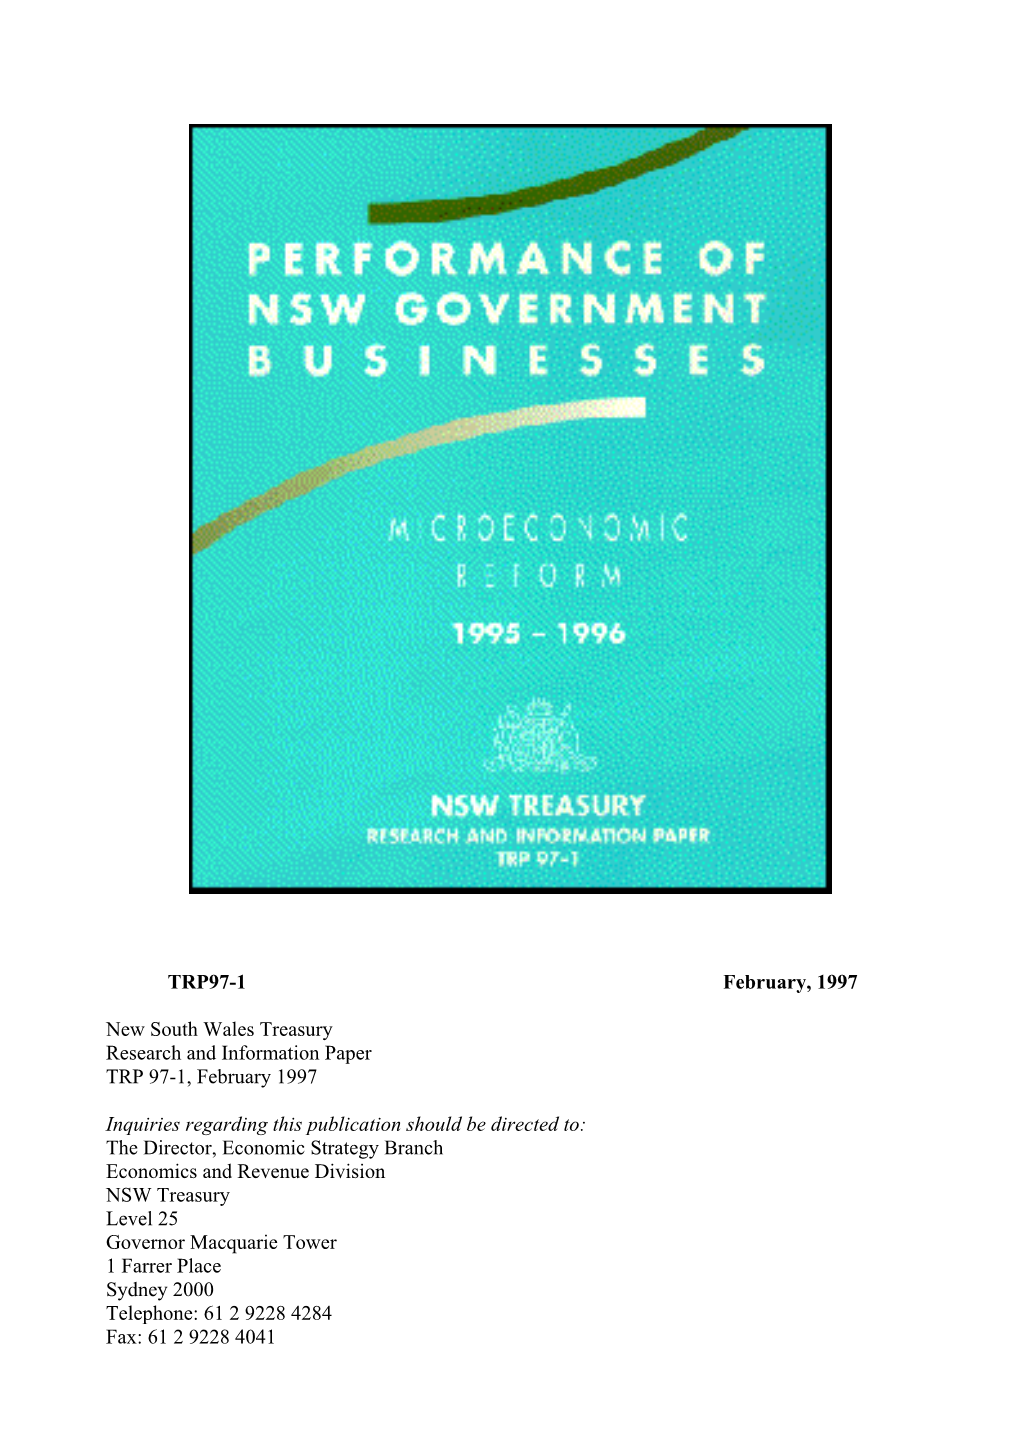 TRP97-01 Performance of NSW Government Businesses 1995-96